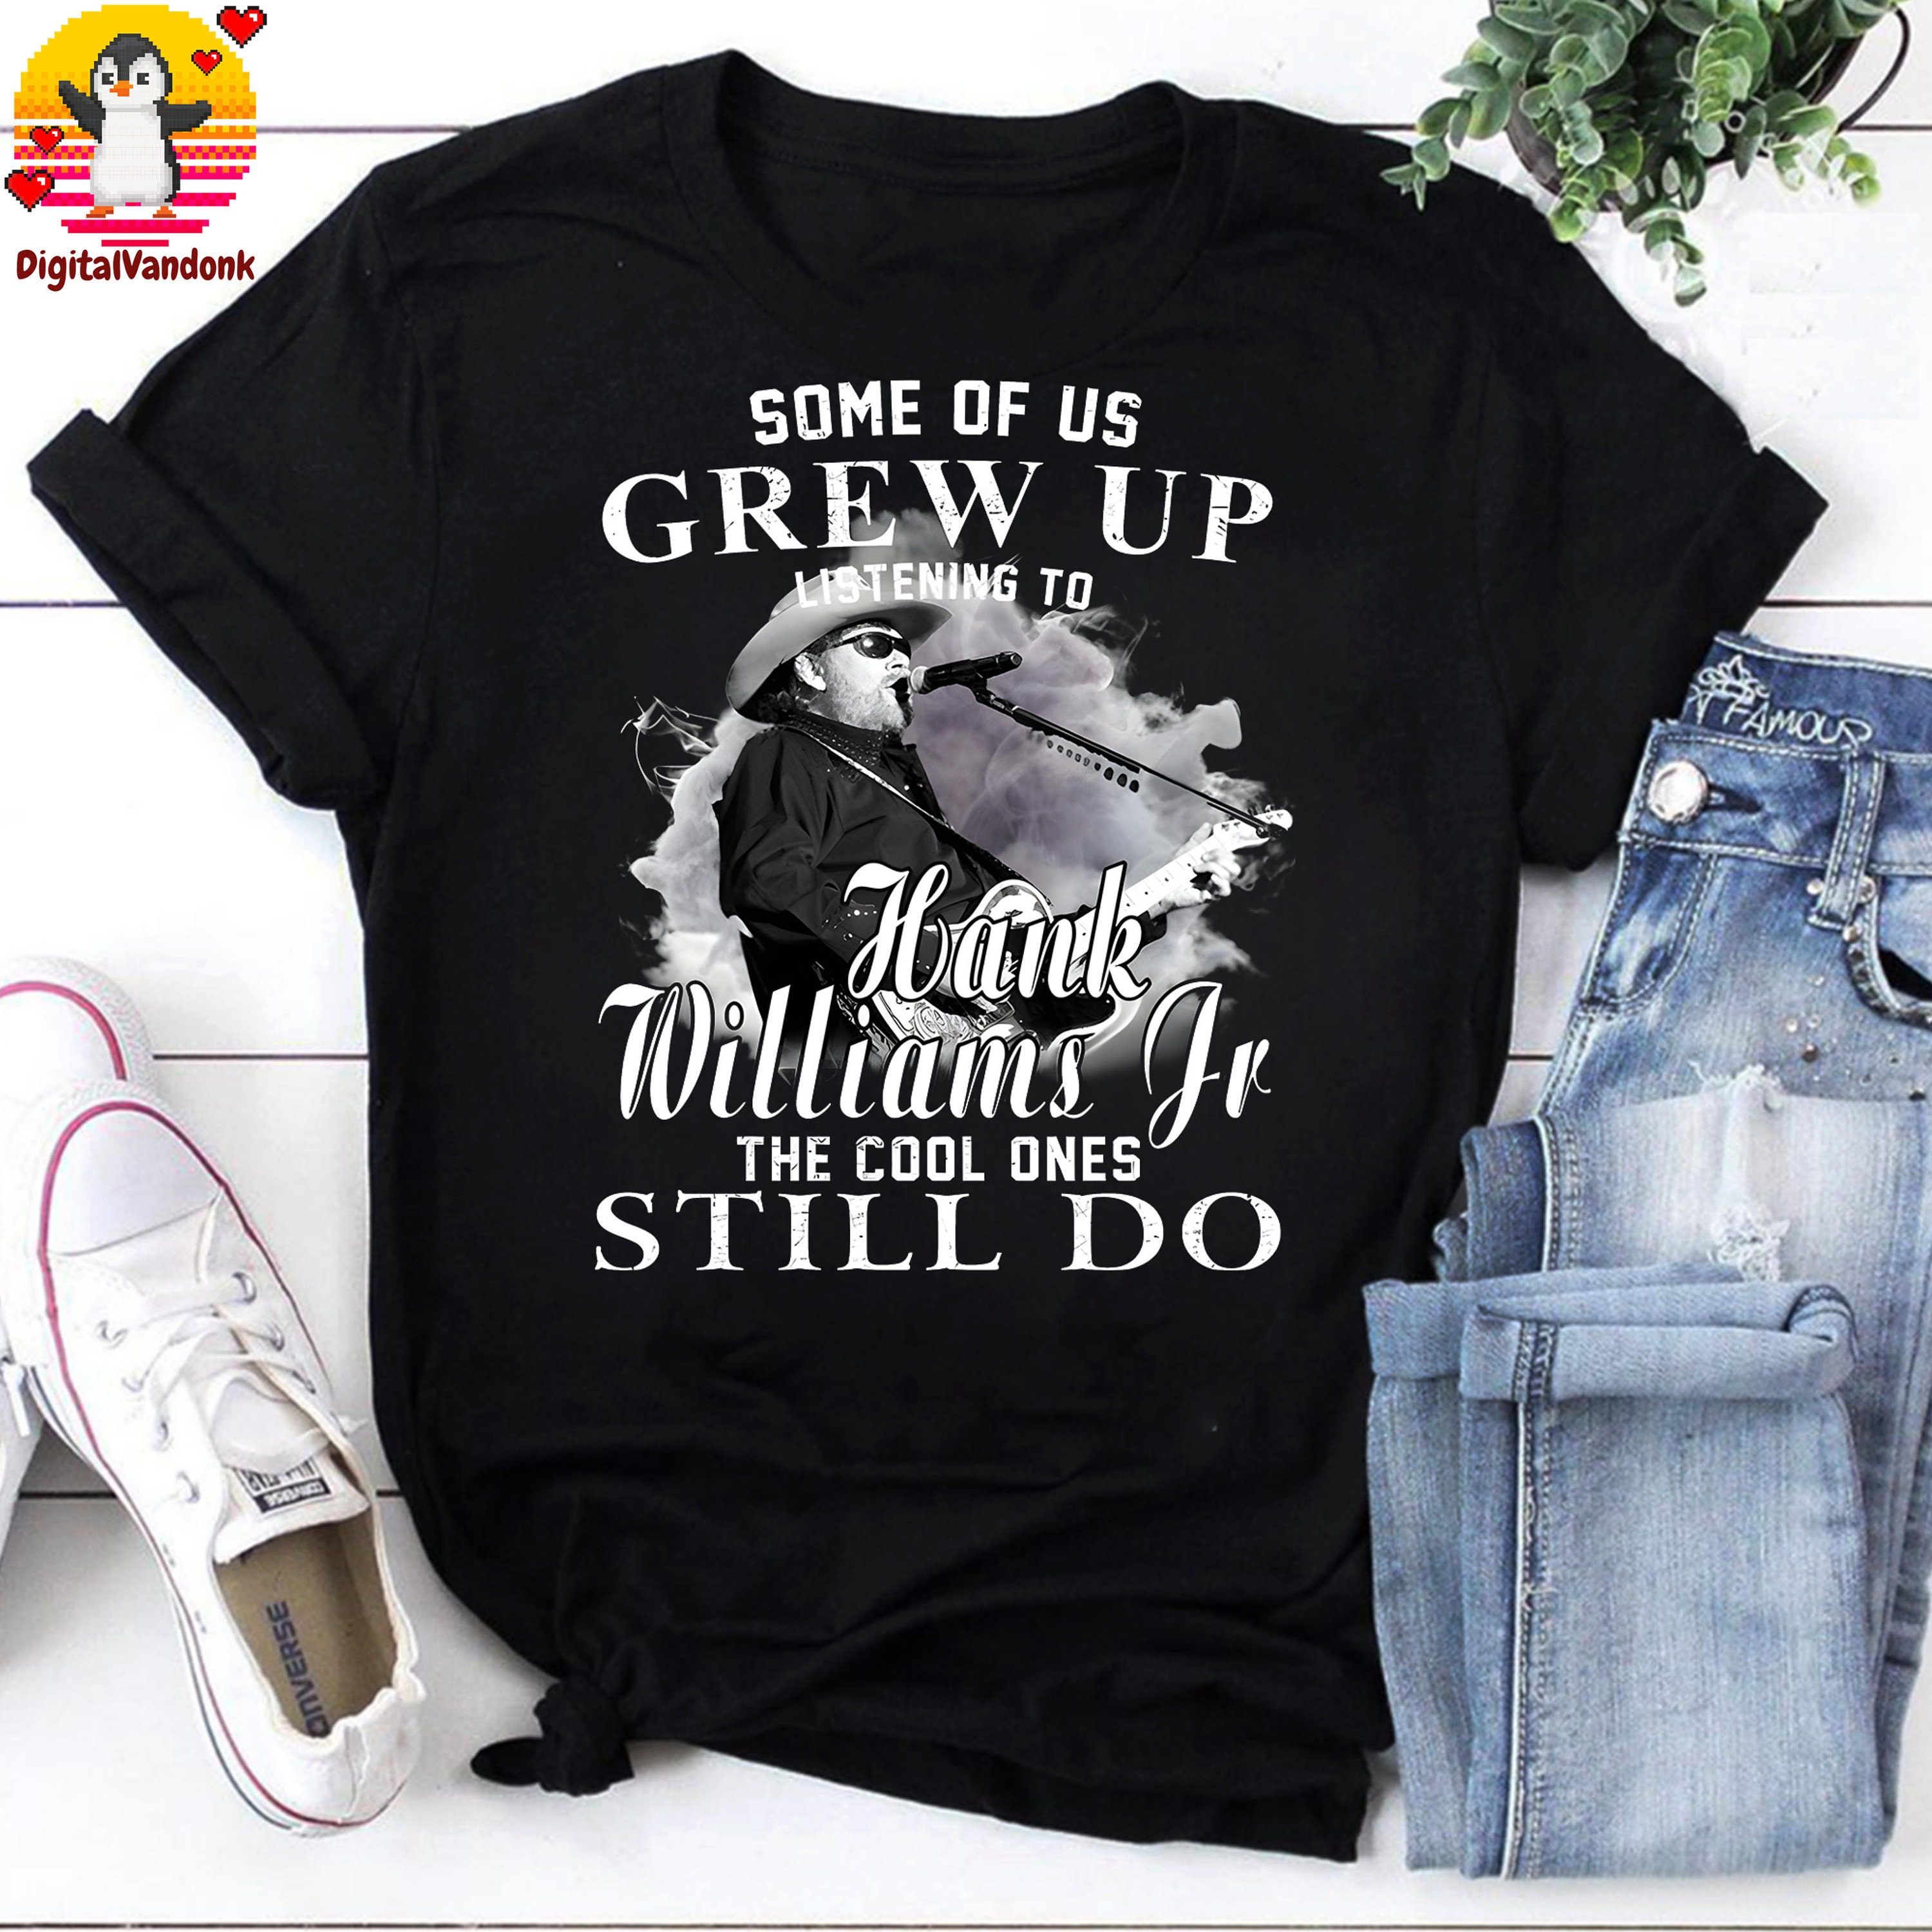 Some Of Us Grew Up Listening To Hank Williams Jr The Cool Ones Still Do Vintage T-Shirt